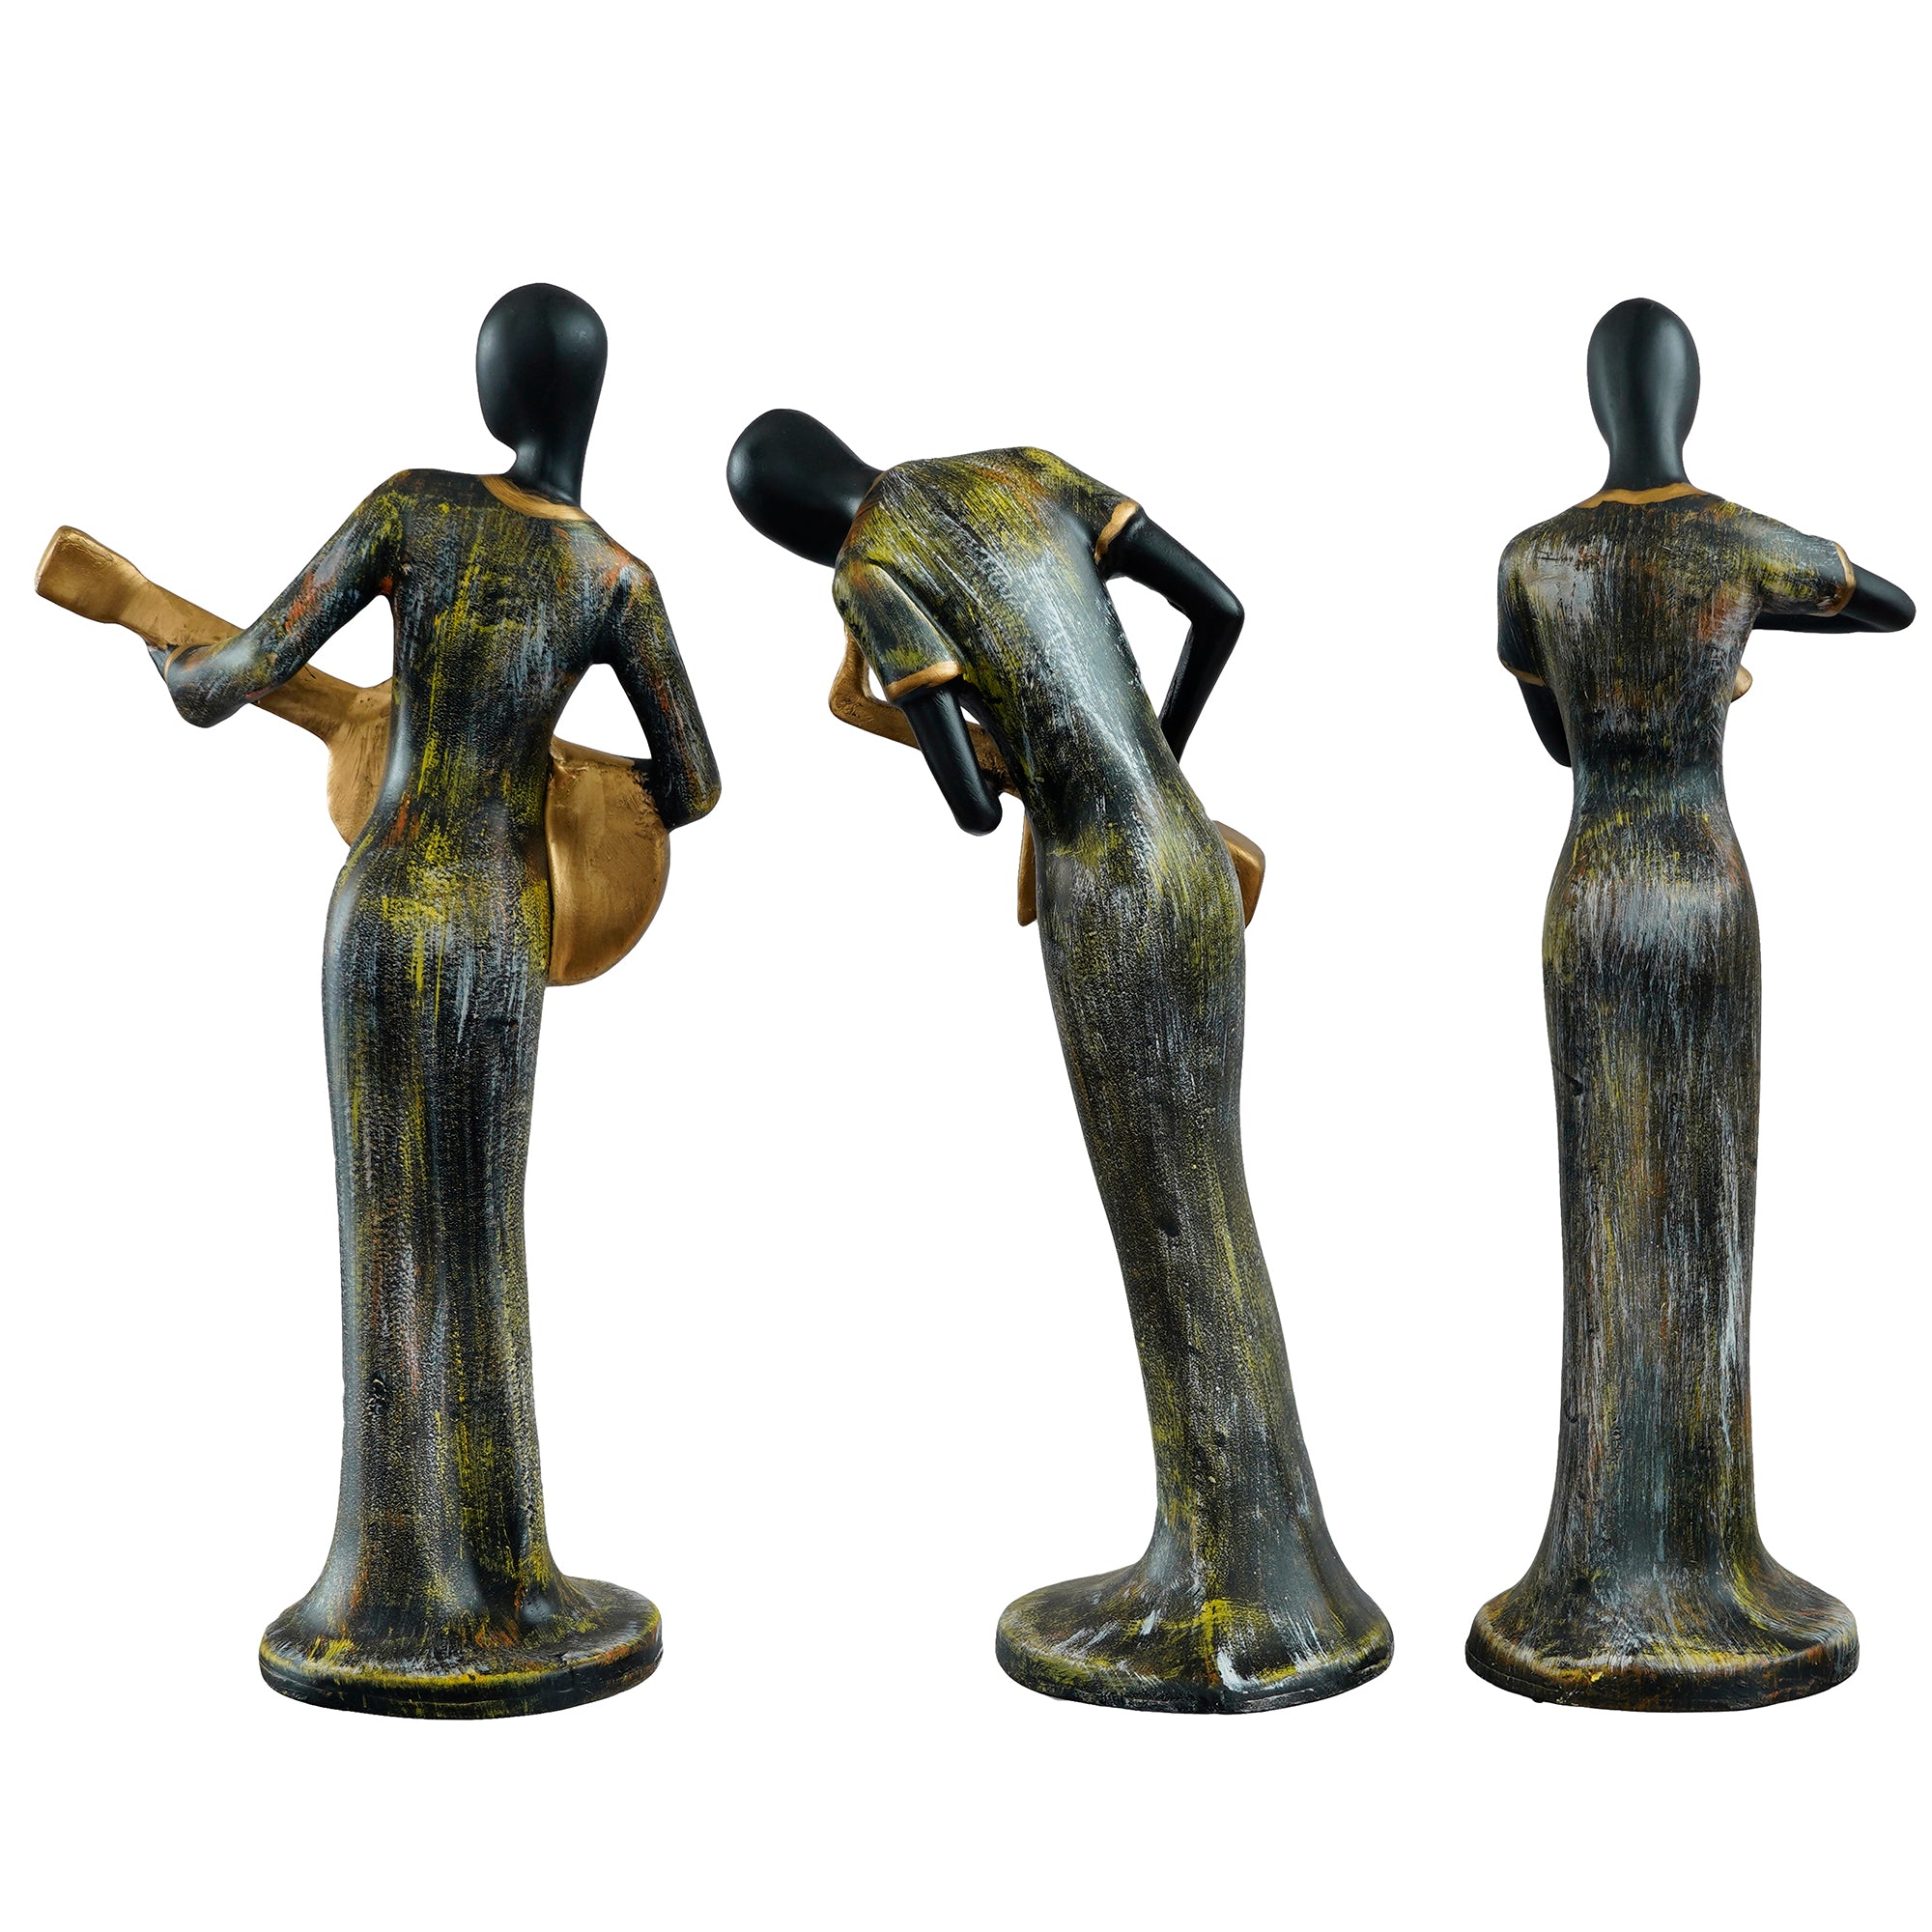 Grey and Black Polyresin Set of 3 Ladies figurines Playing Guitar, Clarinet, Saxophone Musical Instrument Handcrafted Decorative Showpiece 6